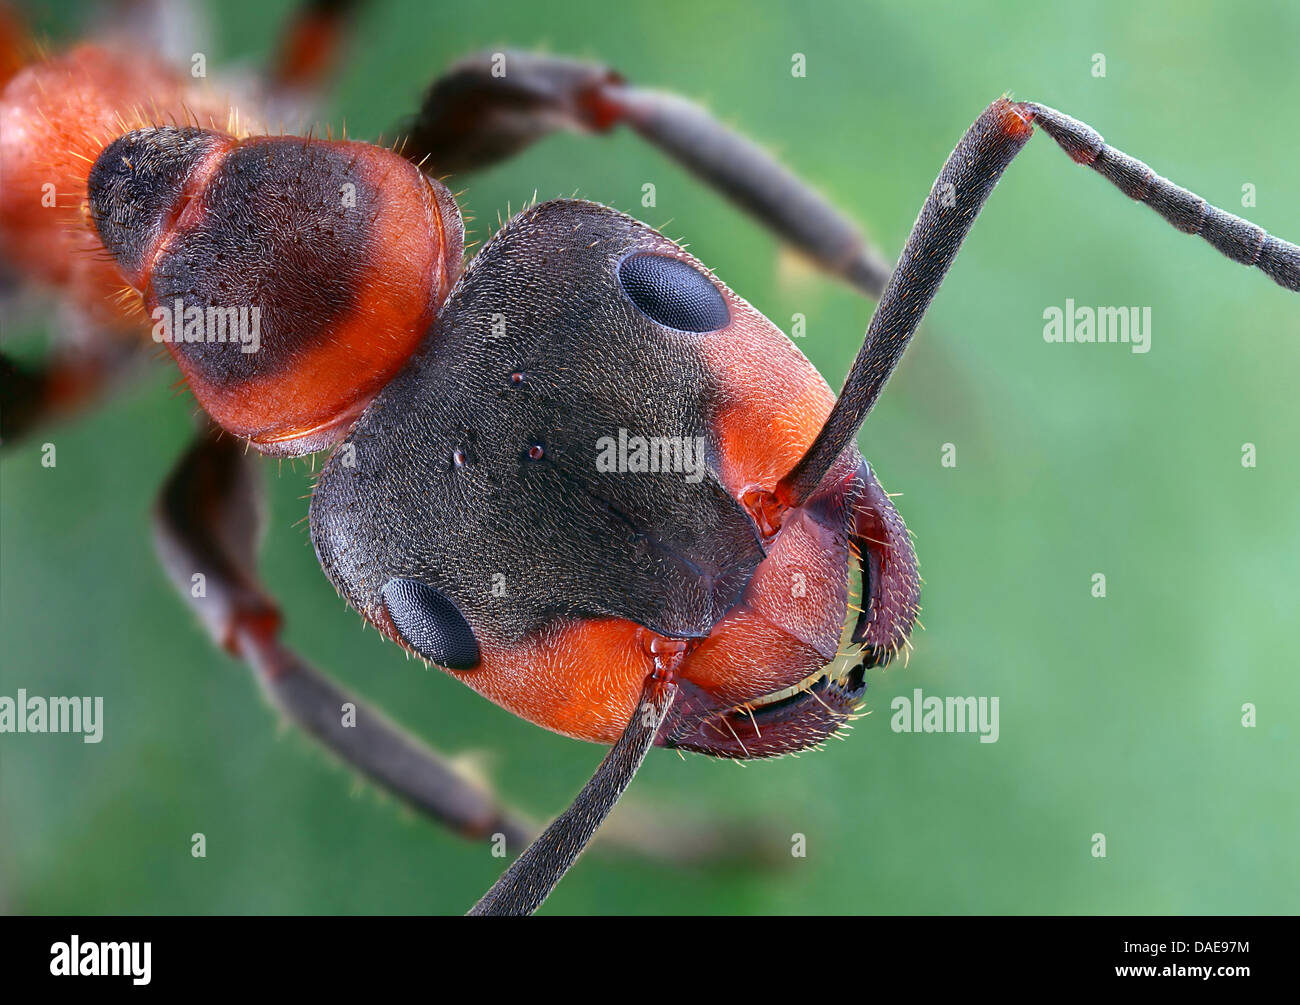 European Red Wood Ant (Formica pratensis), head, top view, Germany Stock Photo